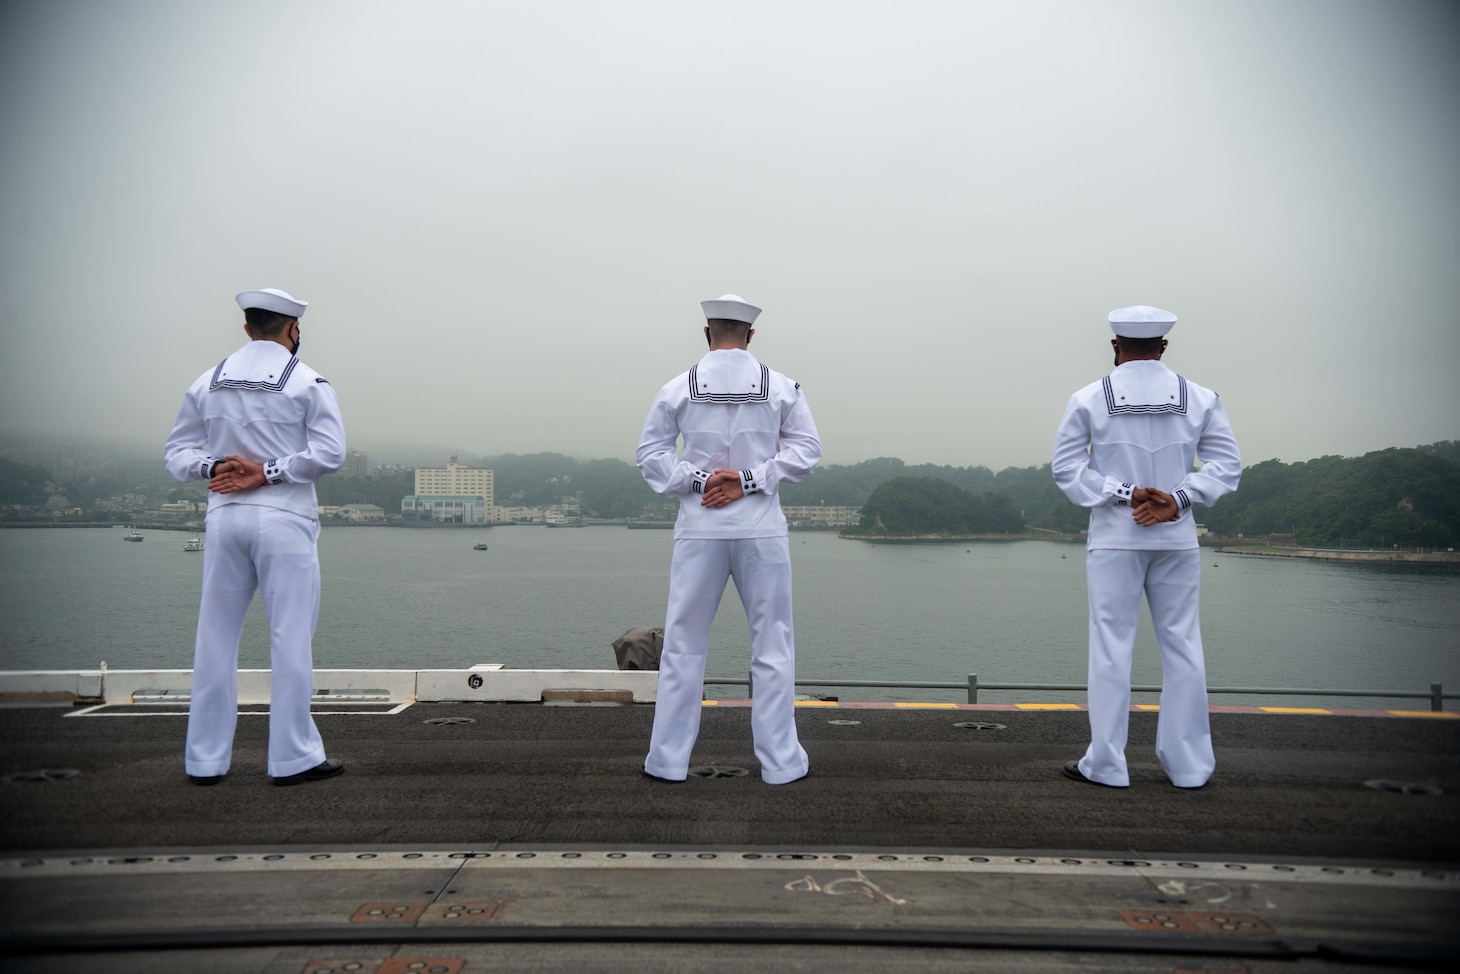 210519-N-LI114-1077 YOKOSUKA, Japan (May 19, 2021) Sailors man the rails on the flight deck of the U.S. Navy’s only forward-deployed aircraft carrier USS Ronald Reagan (CVN 76) as it departs Commander, Fleet Activities Yokosuka, Japan. Ronald Reagan, the flagship of Carrier Strike Group Five, provides a combat-ready force that protects and defends the United States, as well as the Collective maritime interests of its allies and partners in the Indo-Pacific region. (U.S. Navy Photo by Mass Communication Specialist 3rd Class Michael B. Jarmiolowski)